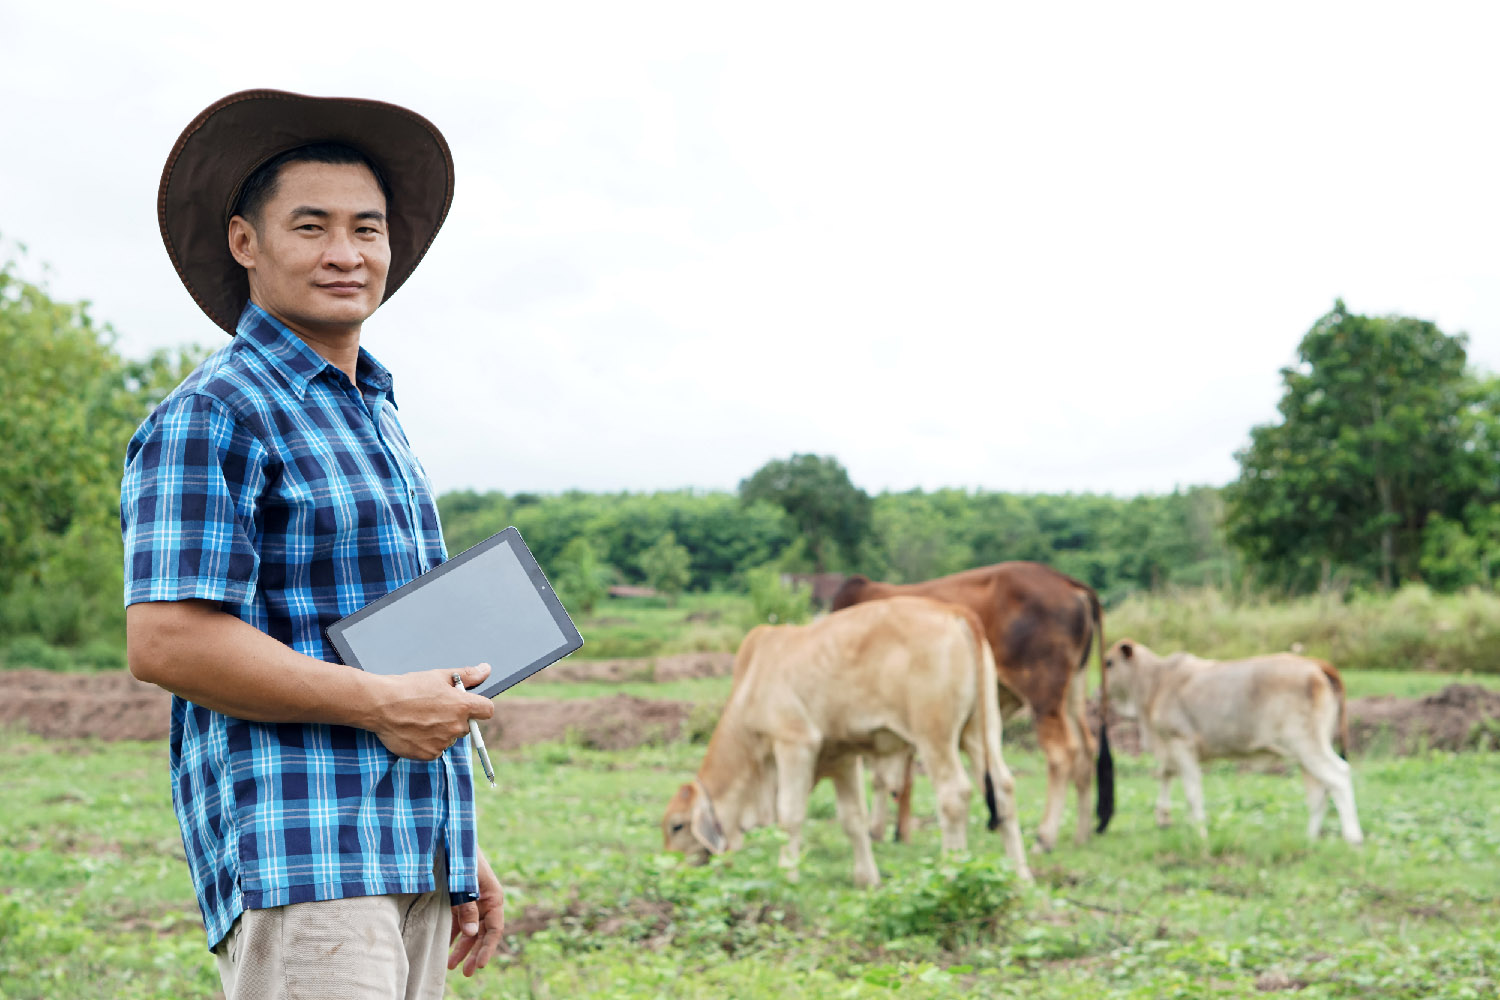 Man with tablet in field with cows